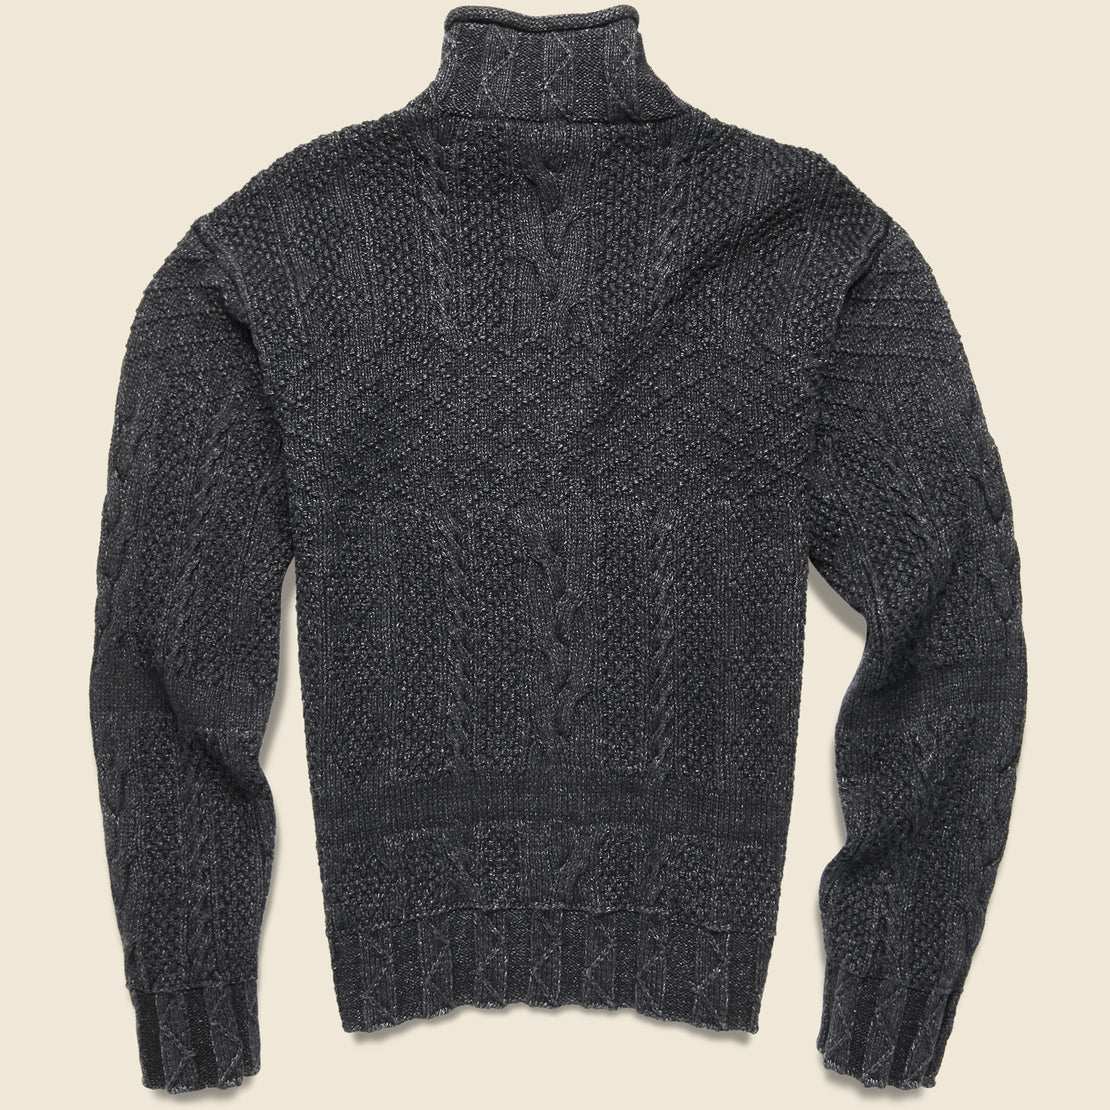 Roll Neck Cable Knit Sweater - Black Indigo - RRL - STAG Provisions - Tops - Sweater